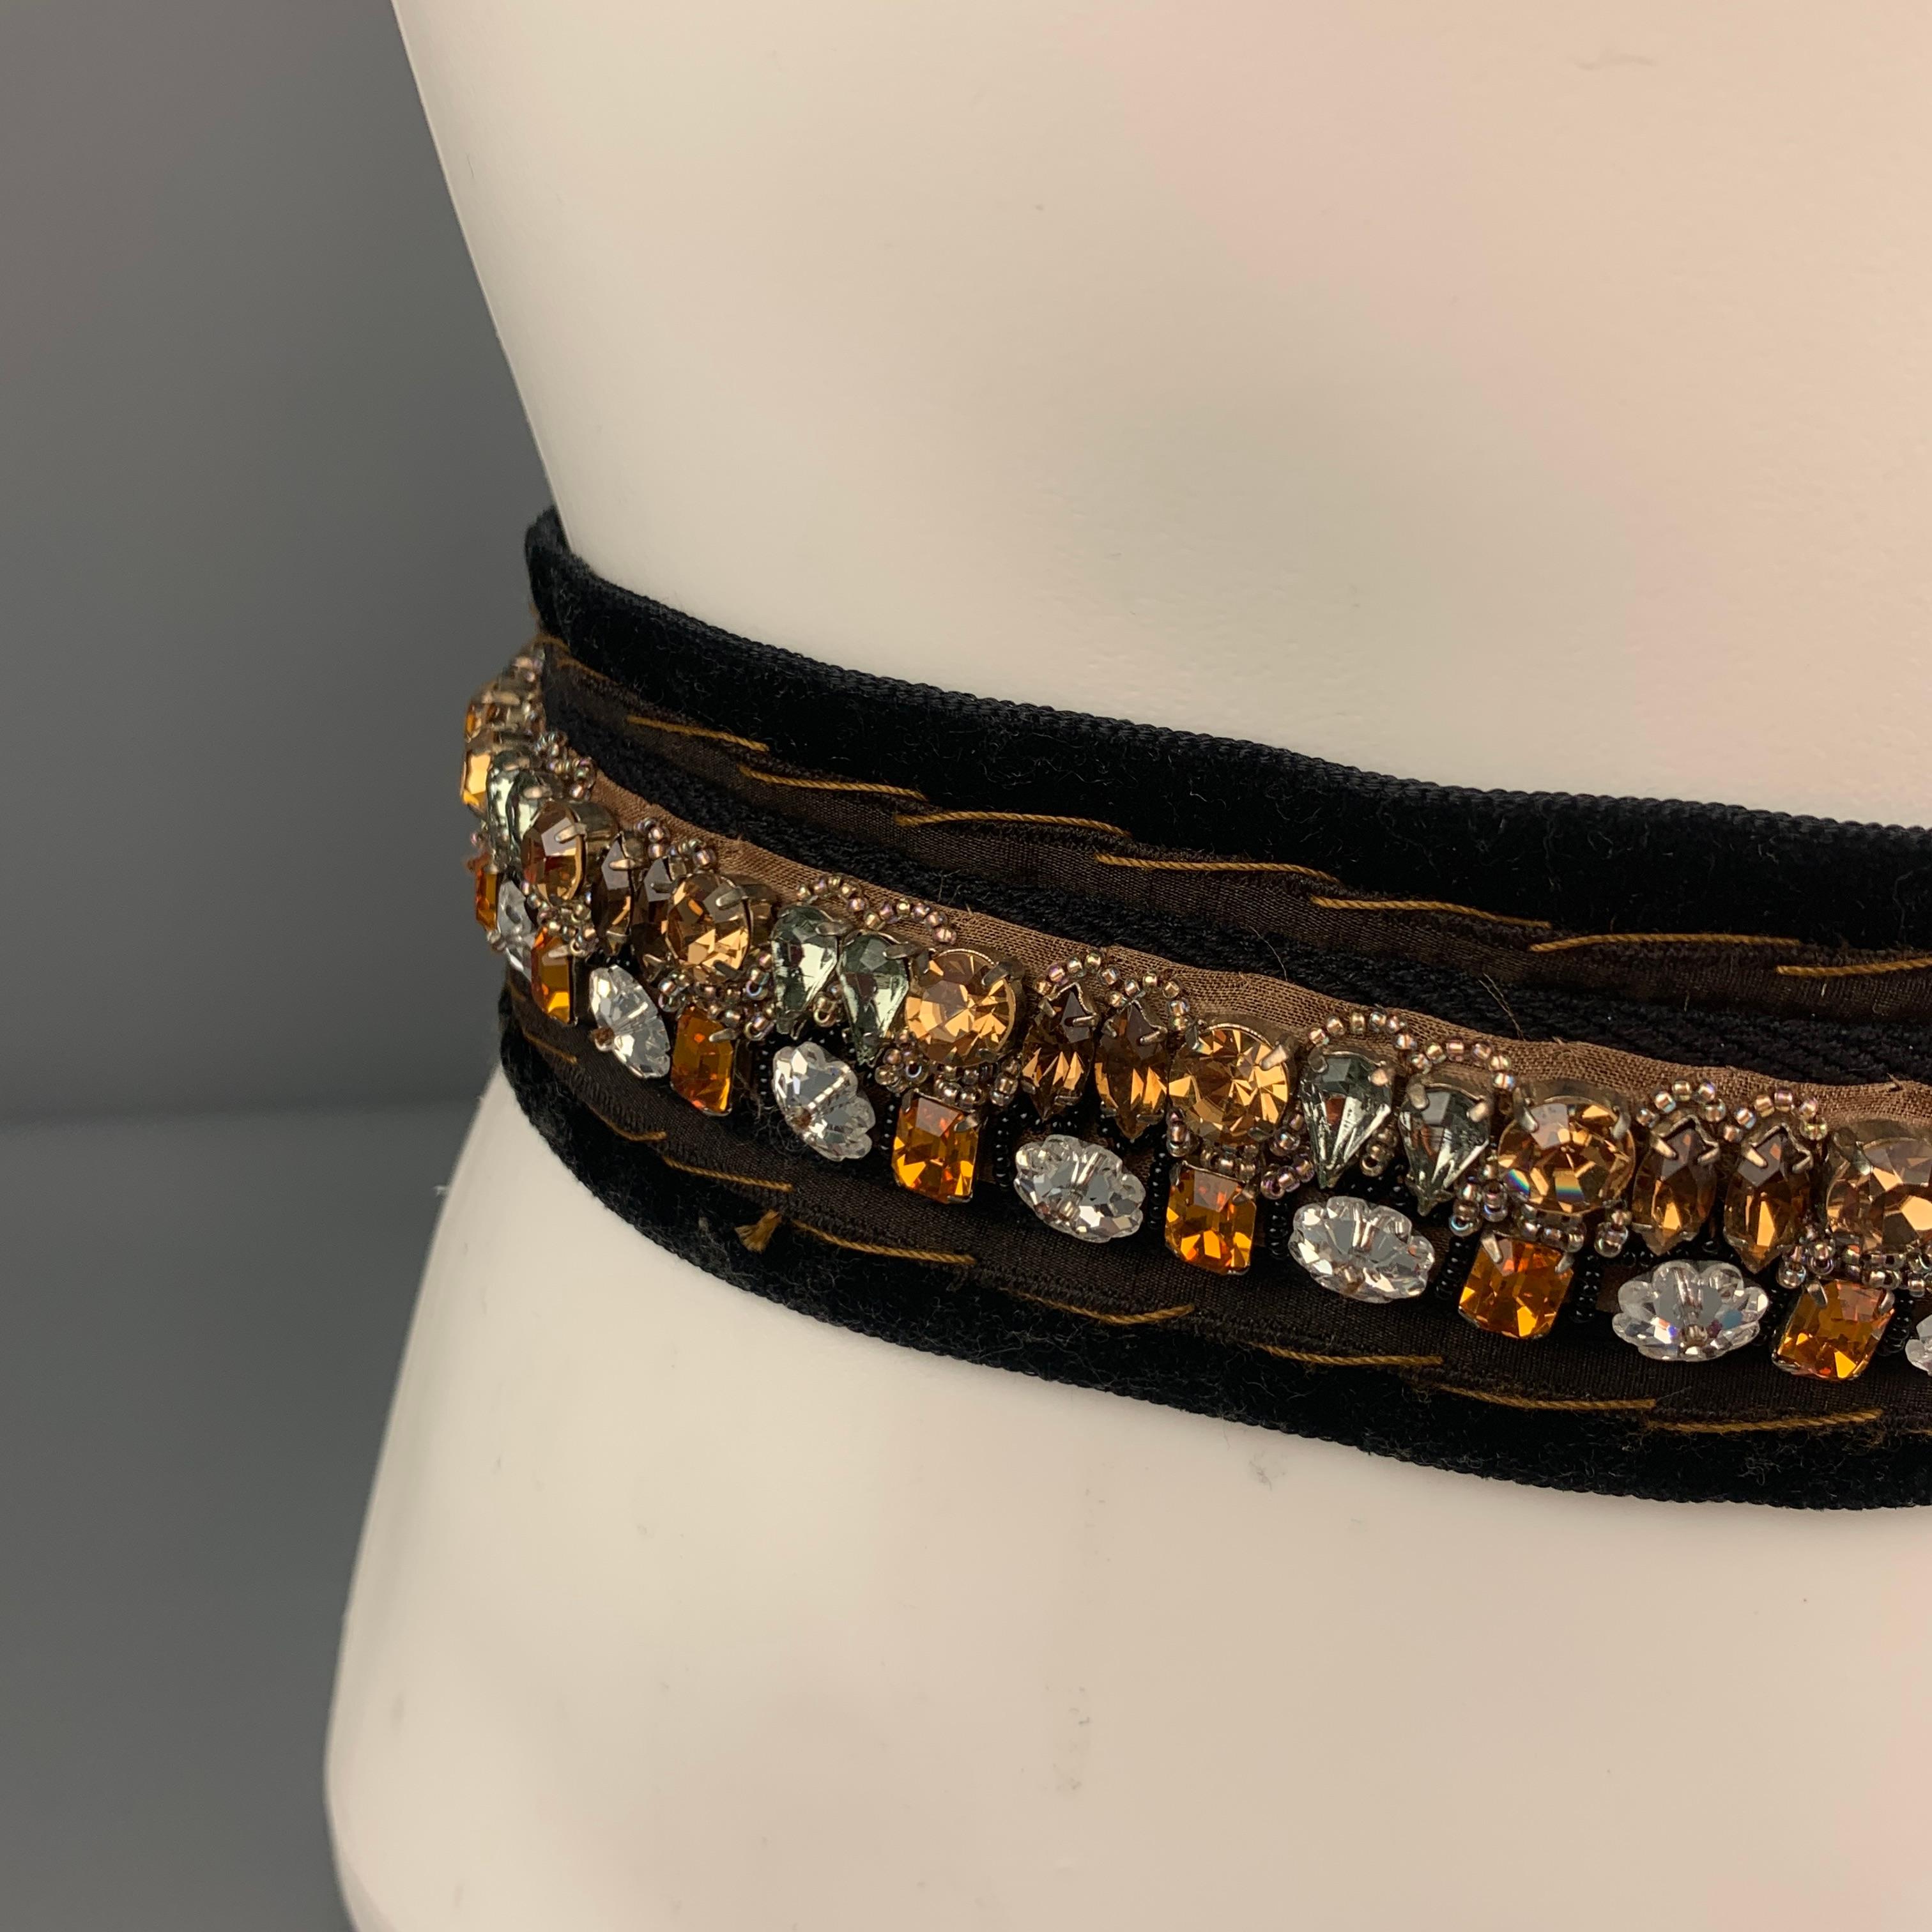 PRADA belt comes in a black velvet featuring rhinestone embellishments and a self tie canvas strap. Comes with box. Made in Italy. 

Very Good Pre-Owned Condition.

Length: 66 in.
Width: 2 in. 